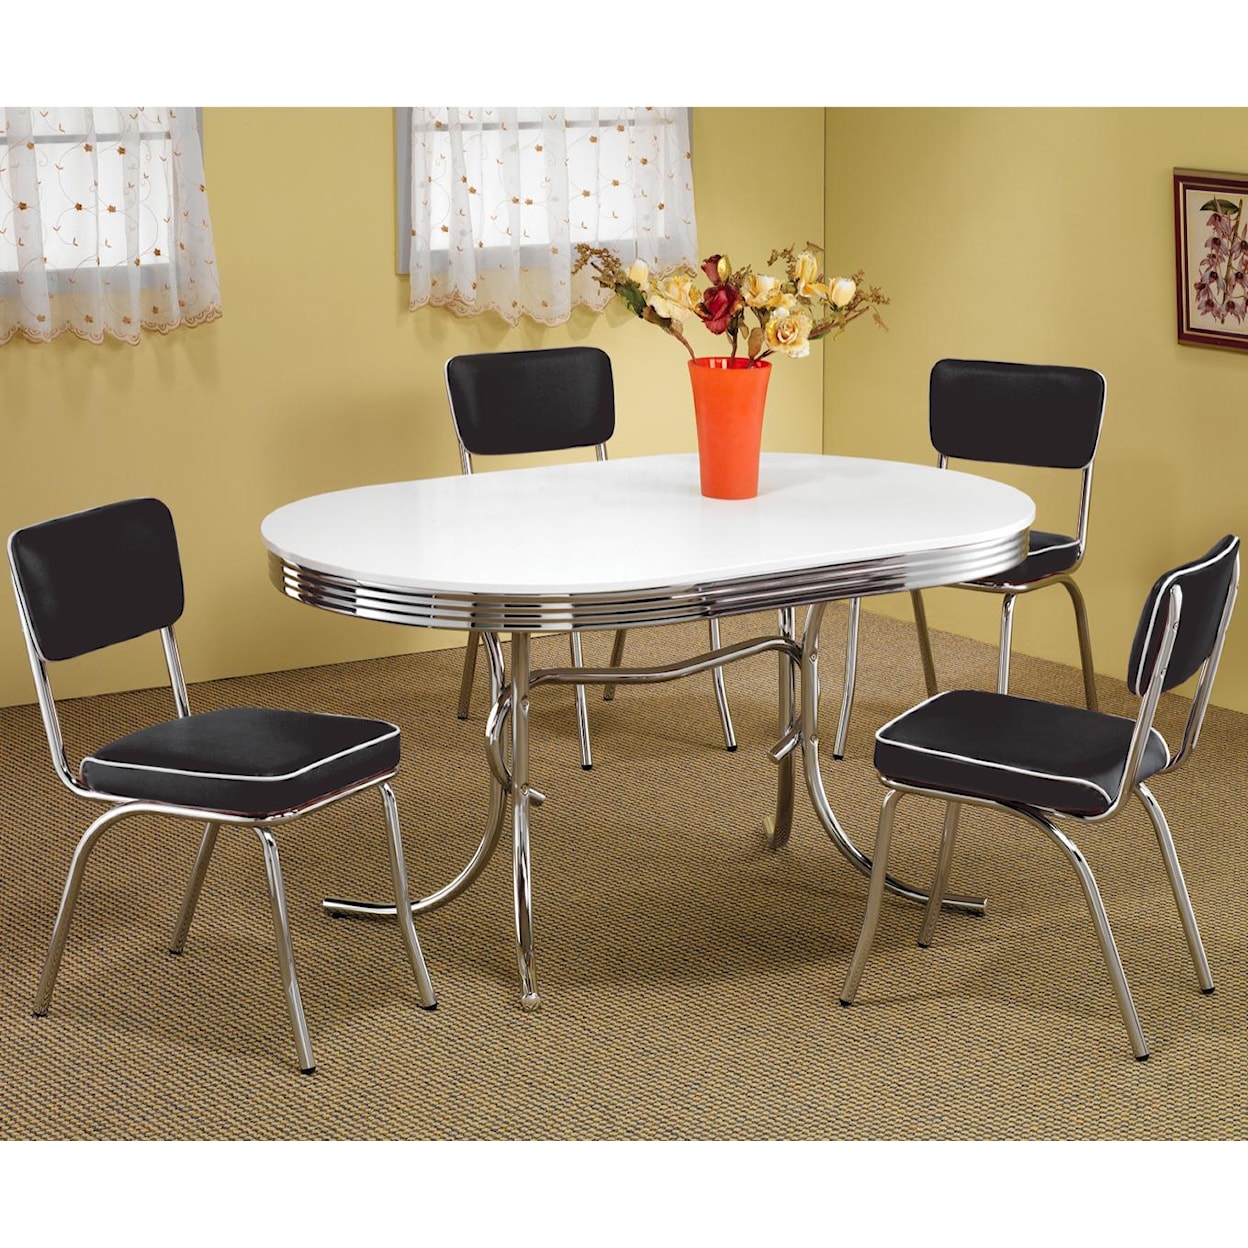 Coaster Cleveland Oval Dining Table